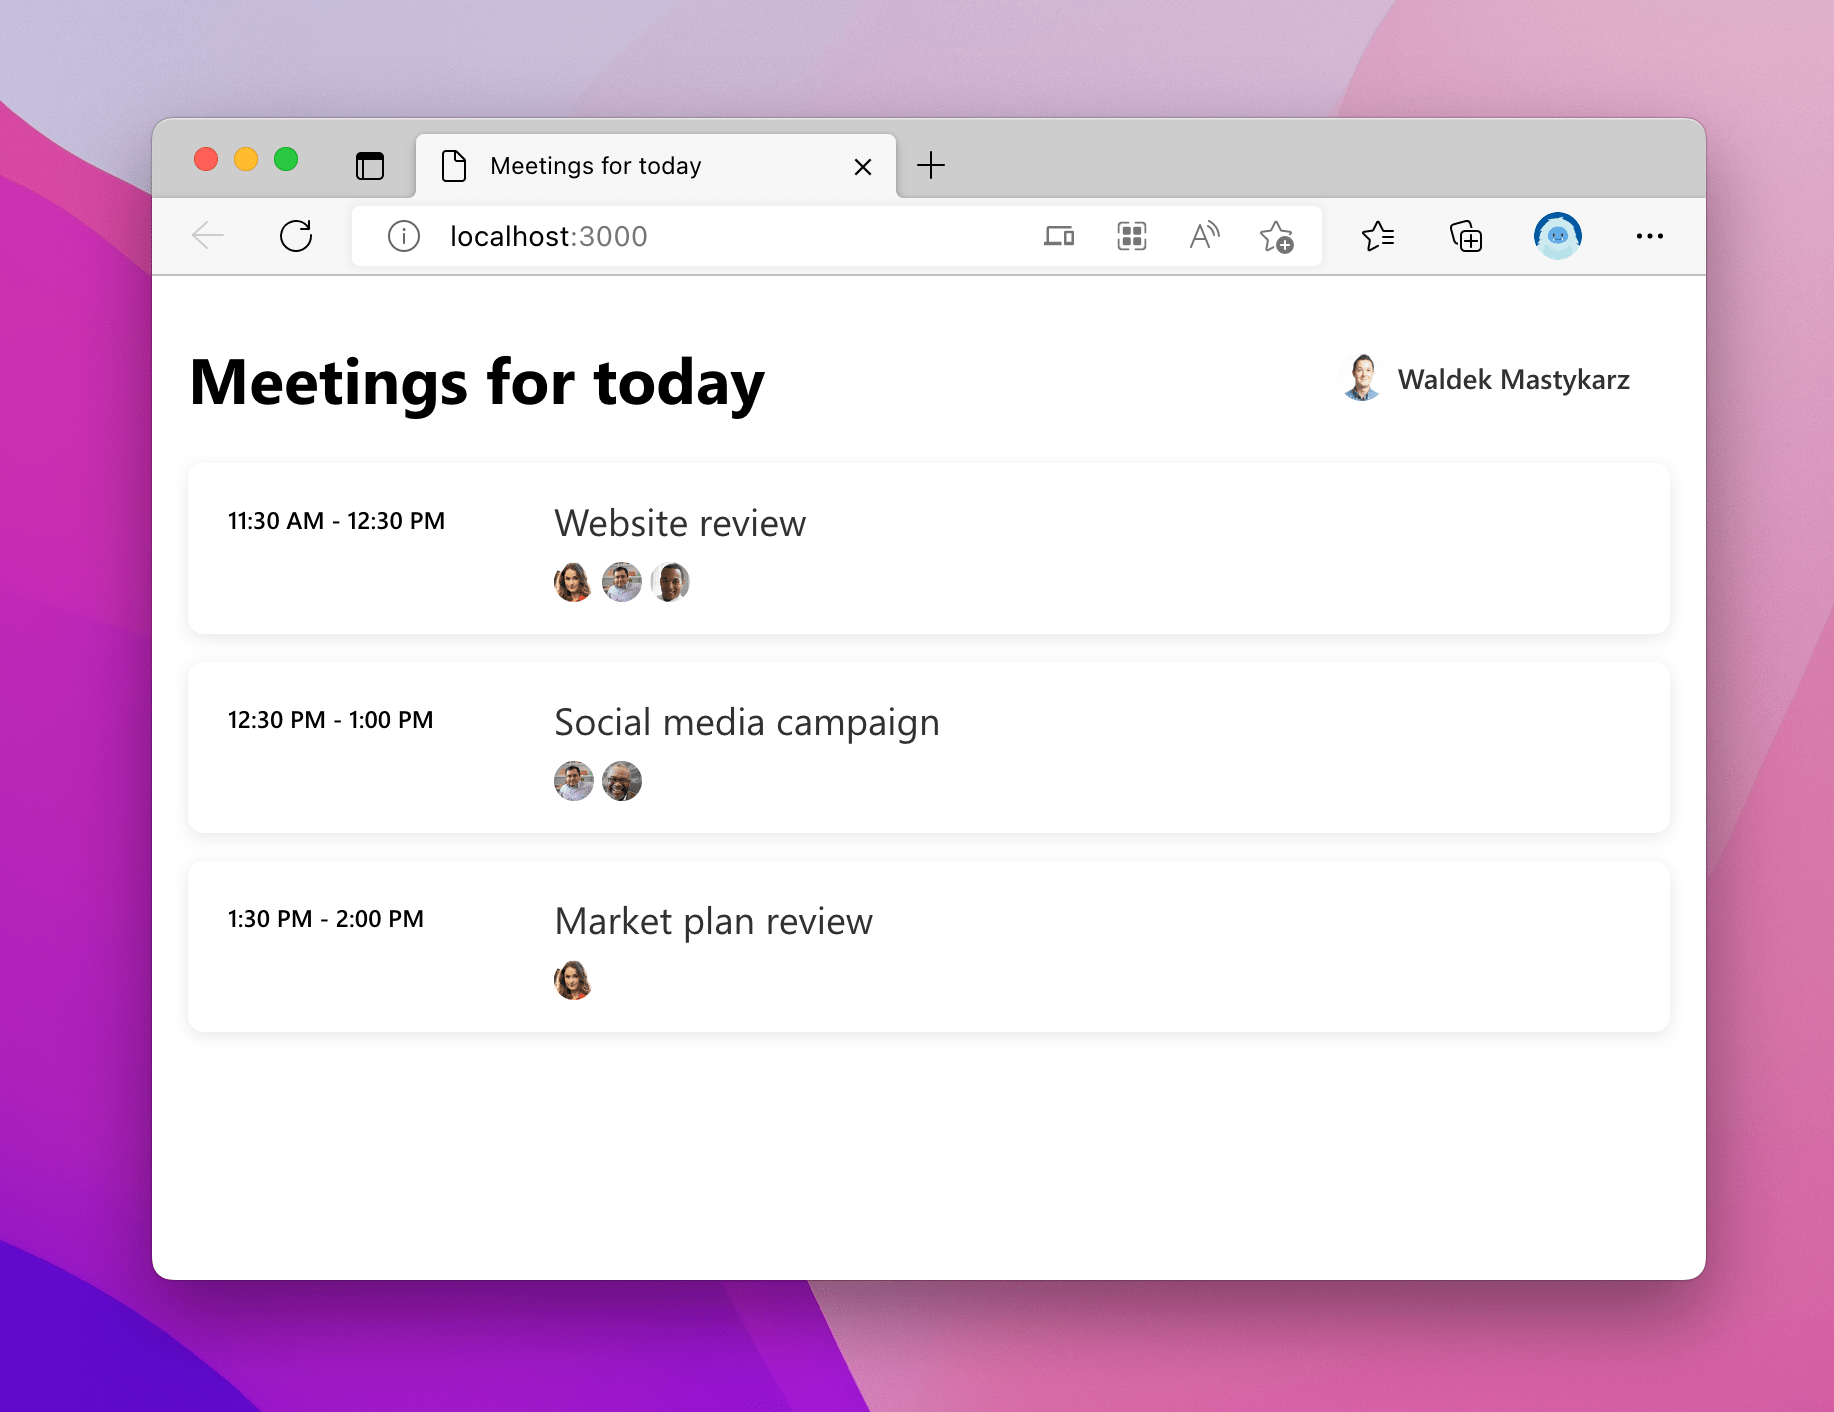 Browser window with a web page showing upcoming meetings for a user